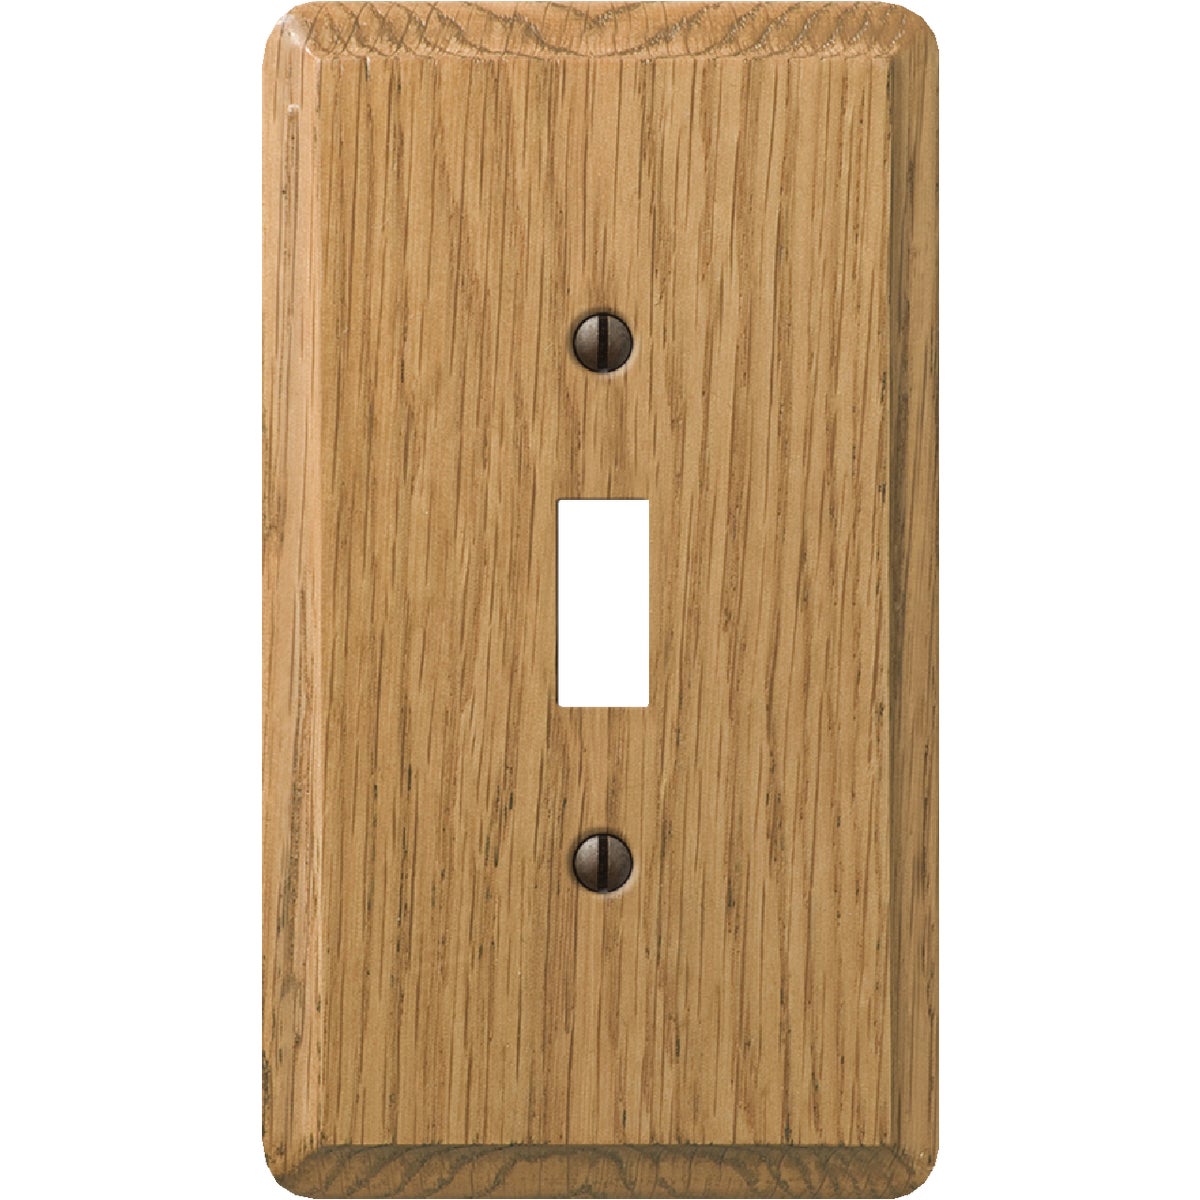 Item 549738, Solid wood toggle switch wall plate. Contemporary styling. Durable.